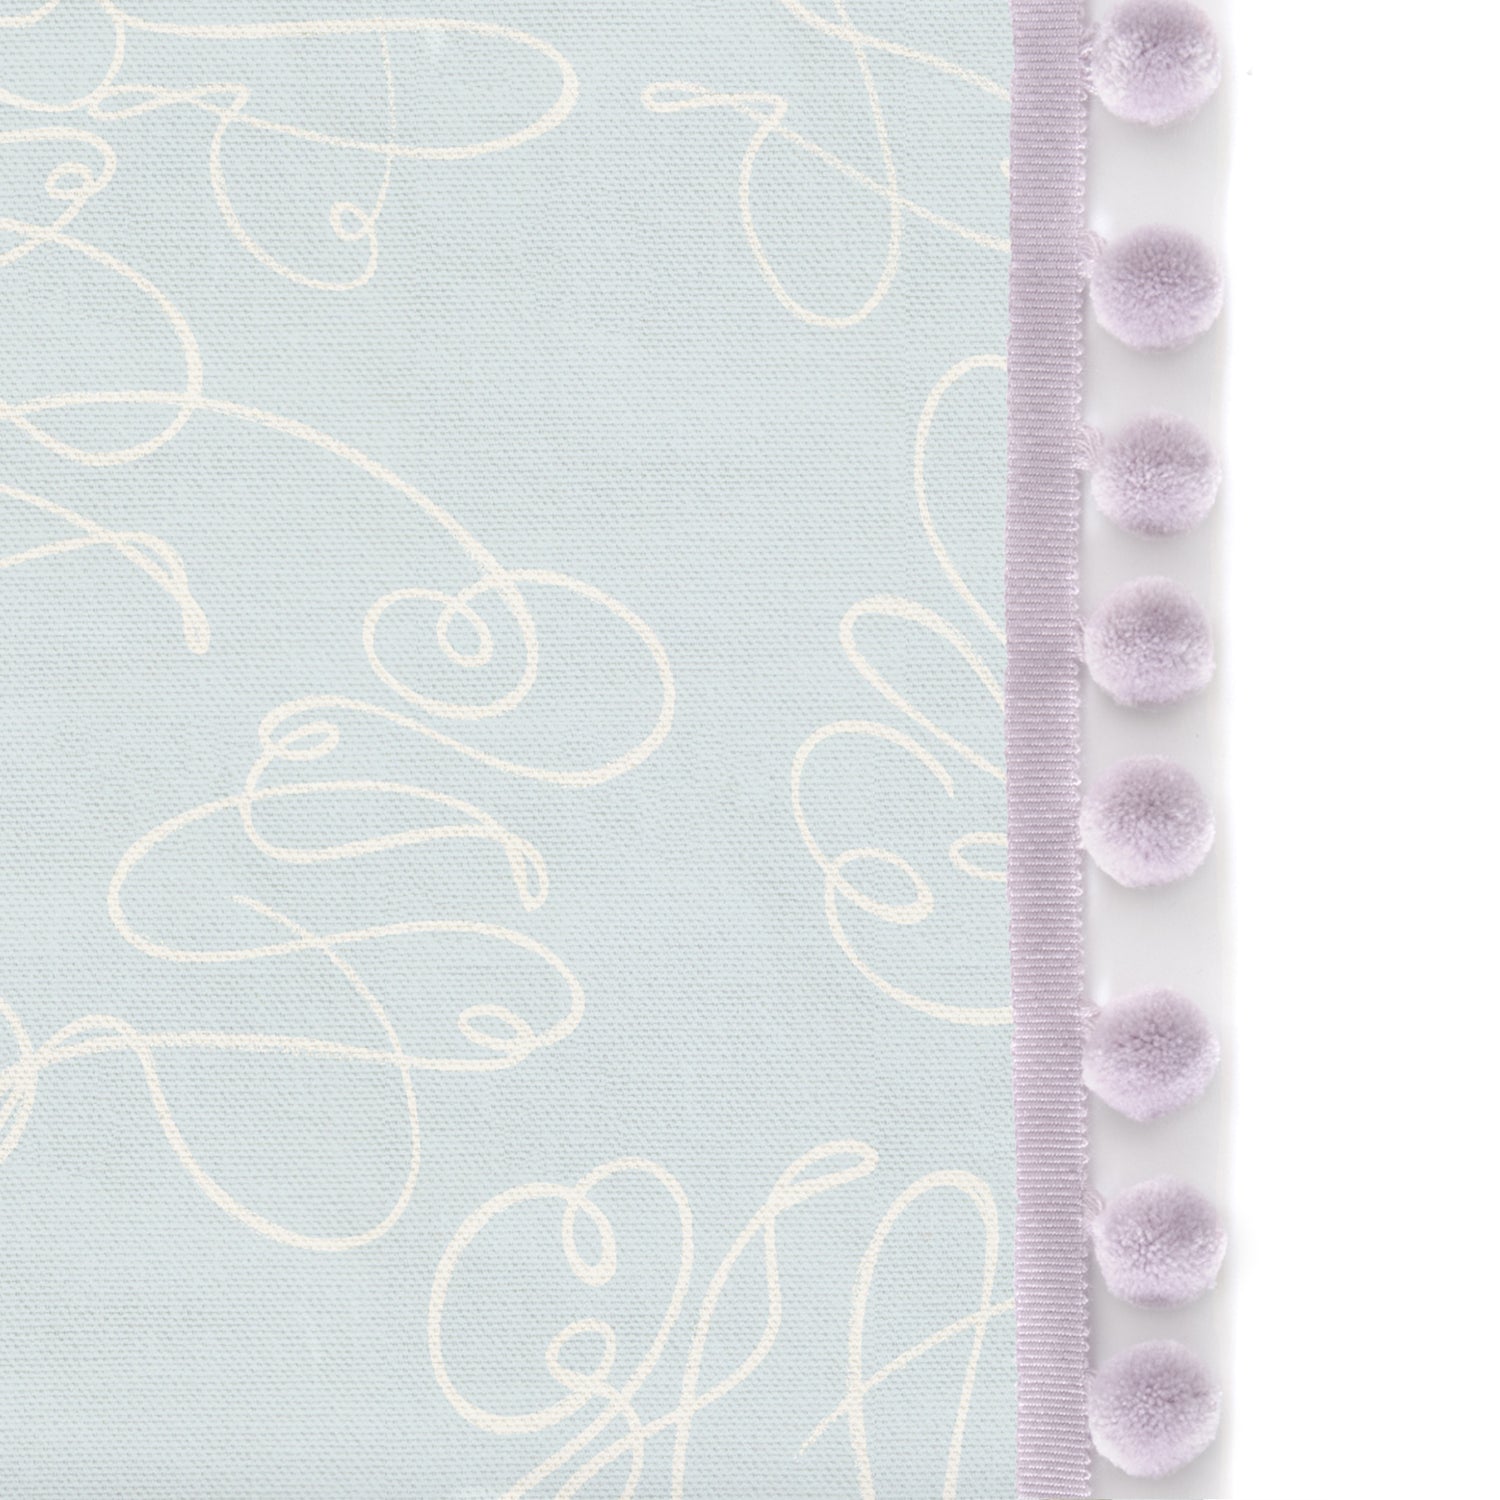 Upclose picture of Mirabella custom Powder Blue Abstractshower curtain with lilac pom pom trim